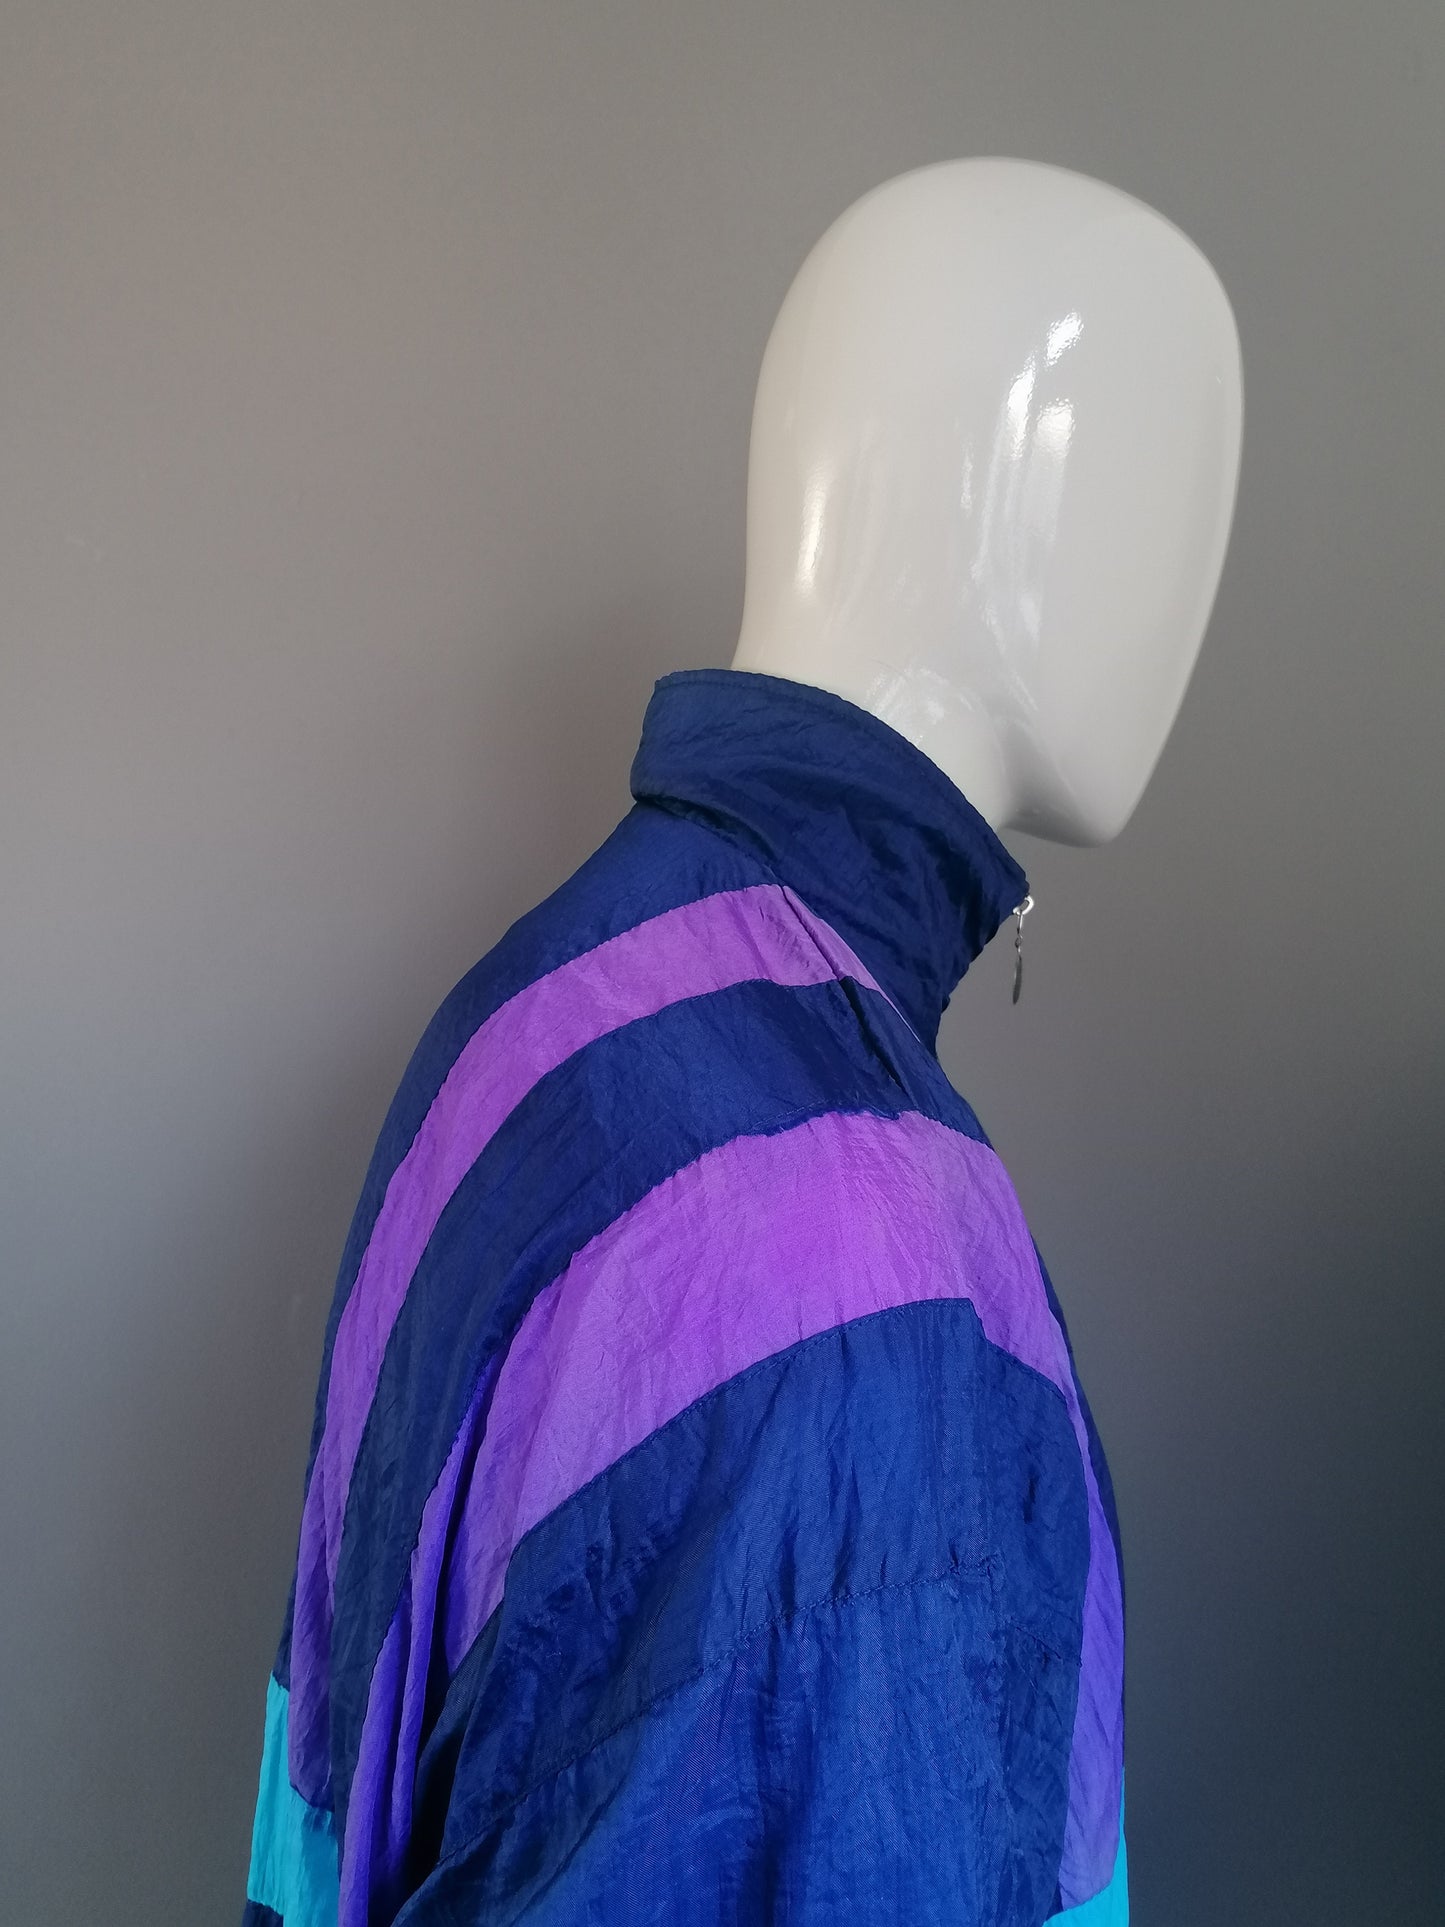 Vintage retro competition windbreaker. Lightly lined. Blue purple colored. Size XXL / 2XL